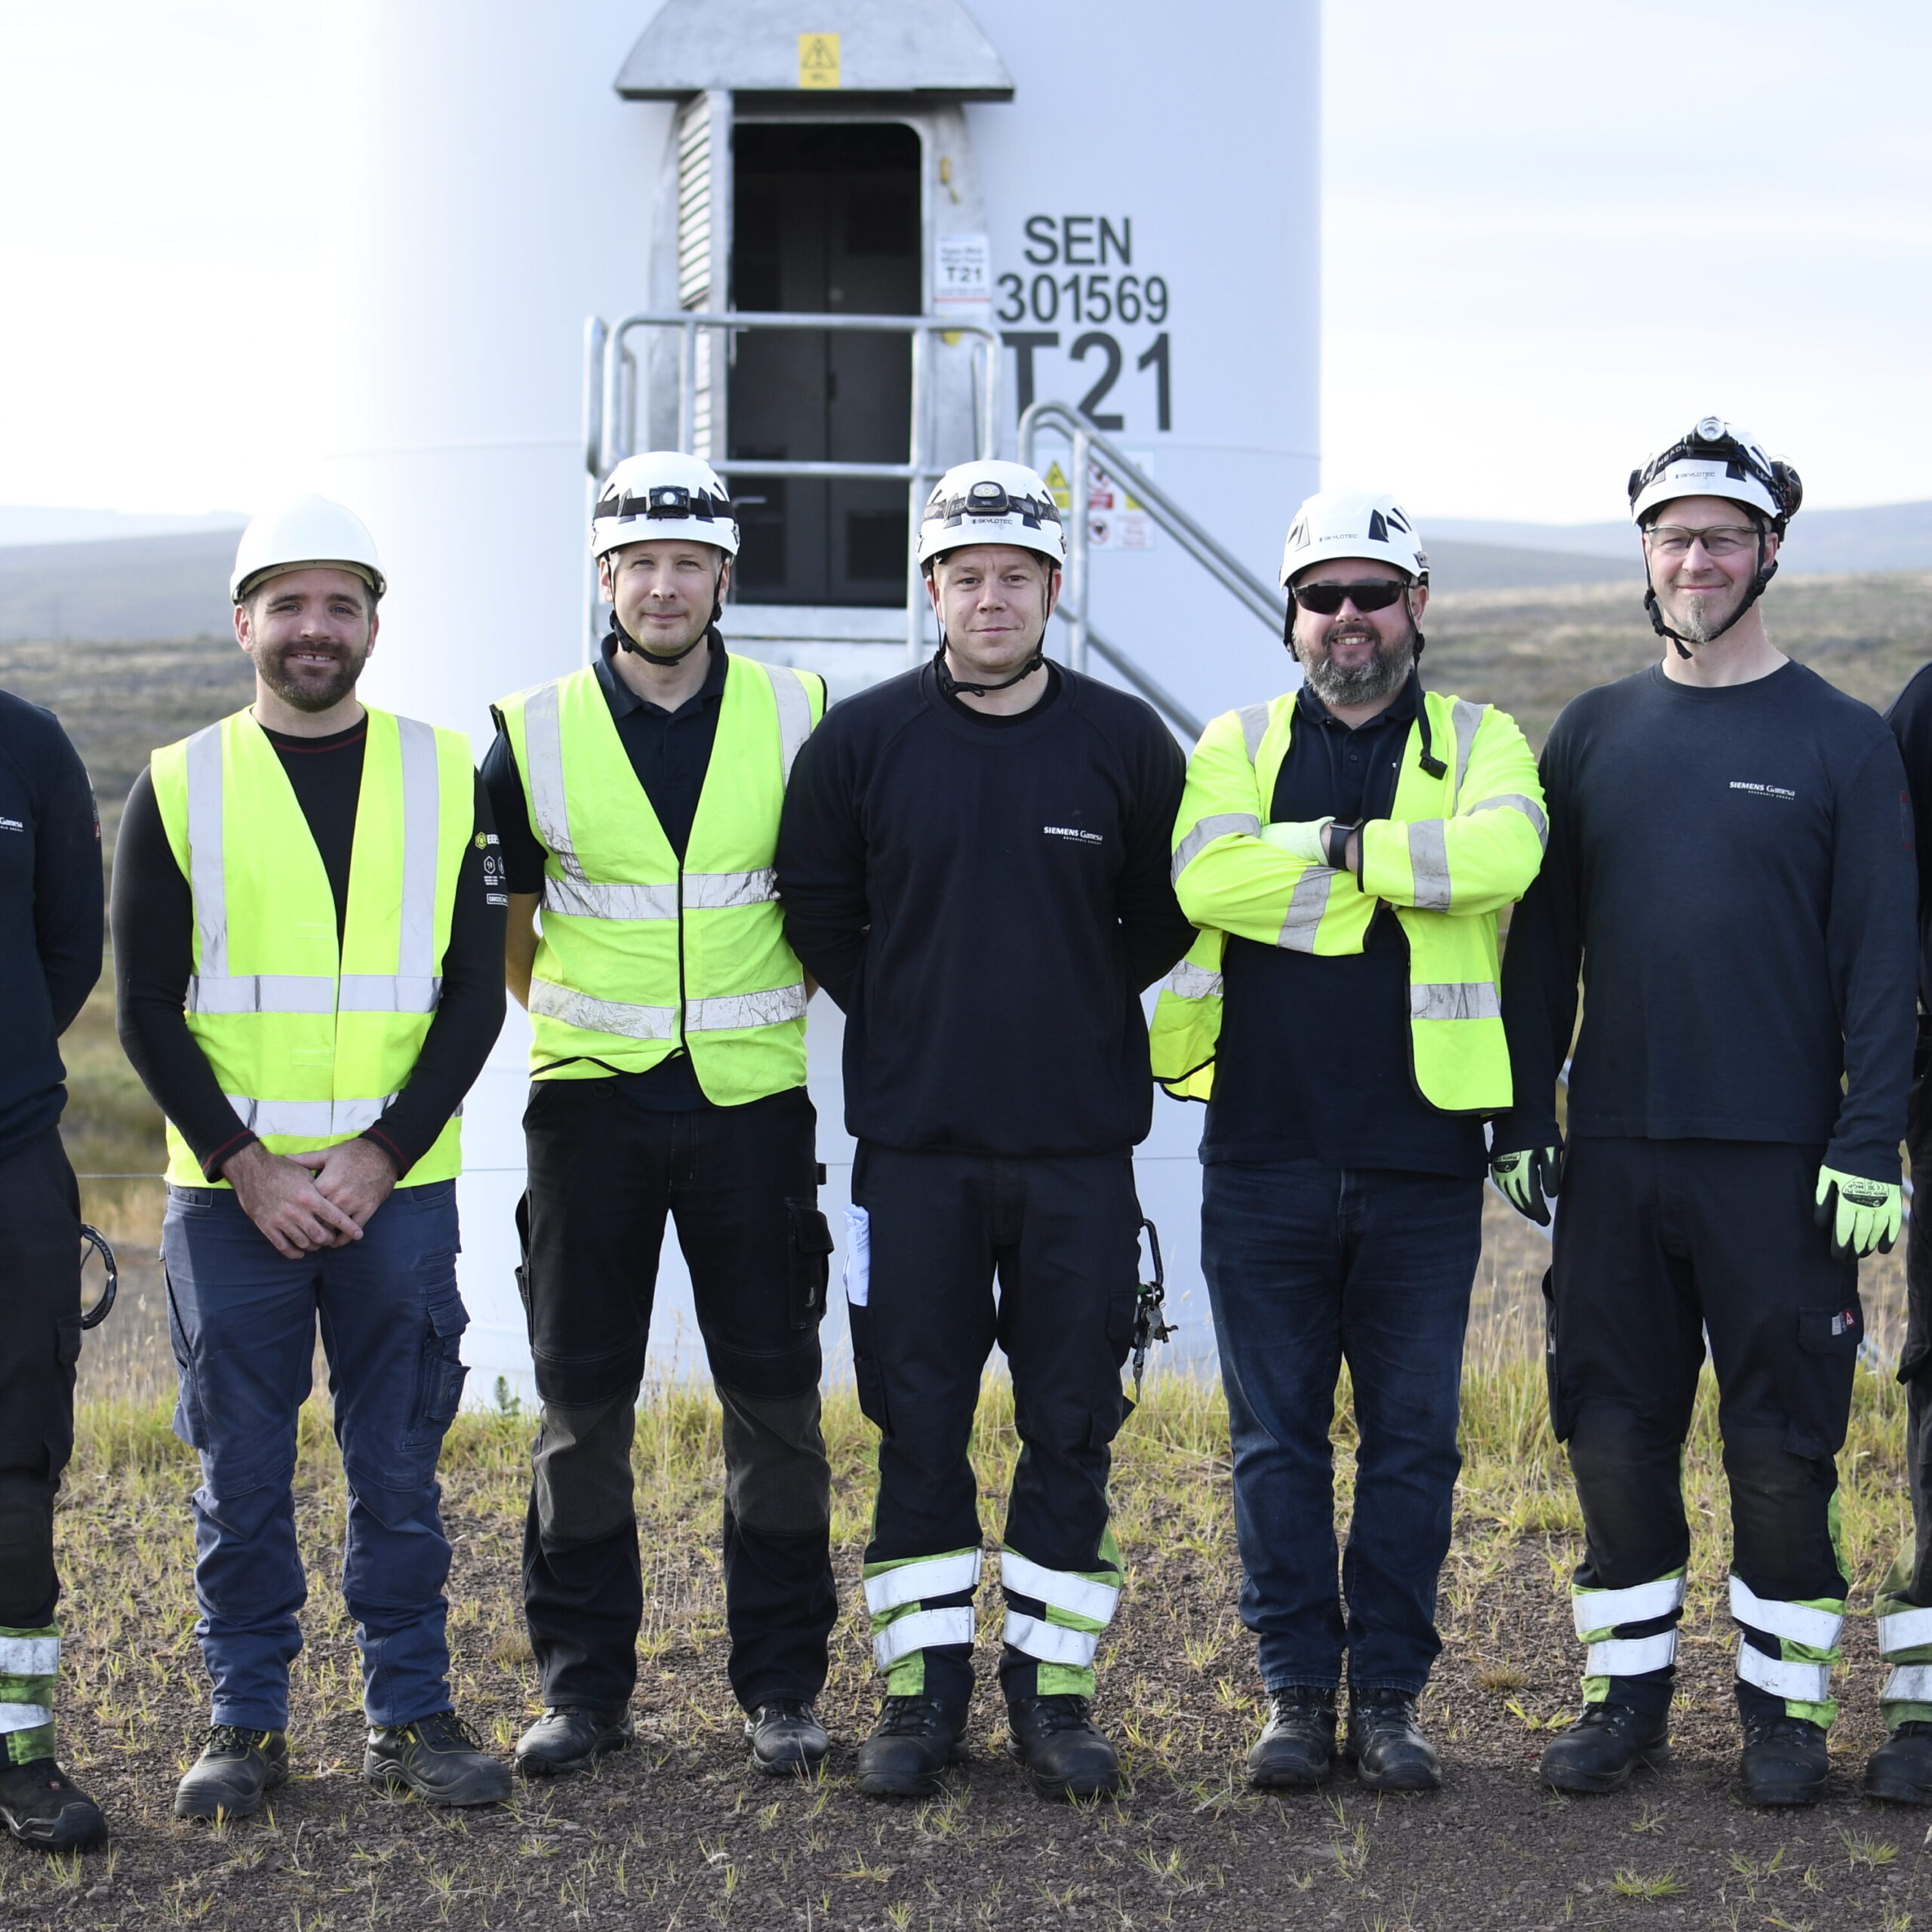 Kype muir wind farm manager, Euan Wright with SGRE technical team